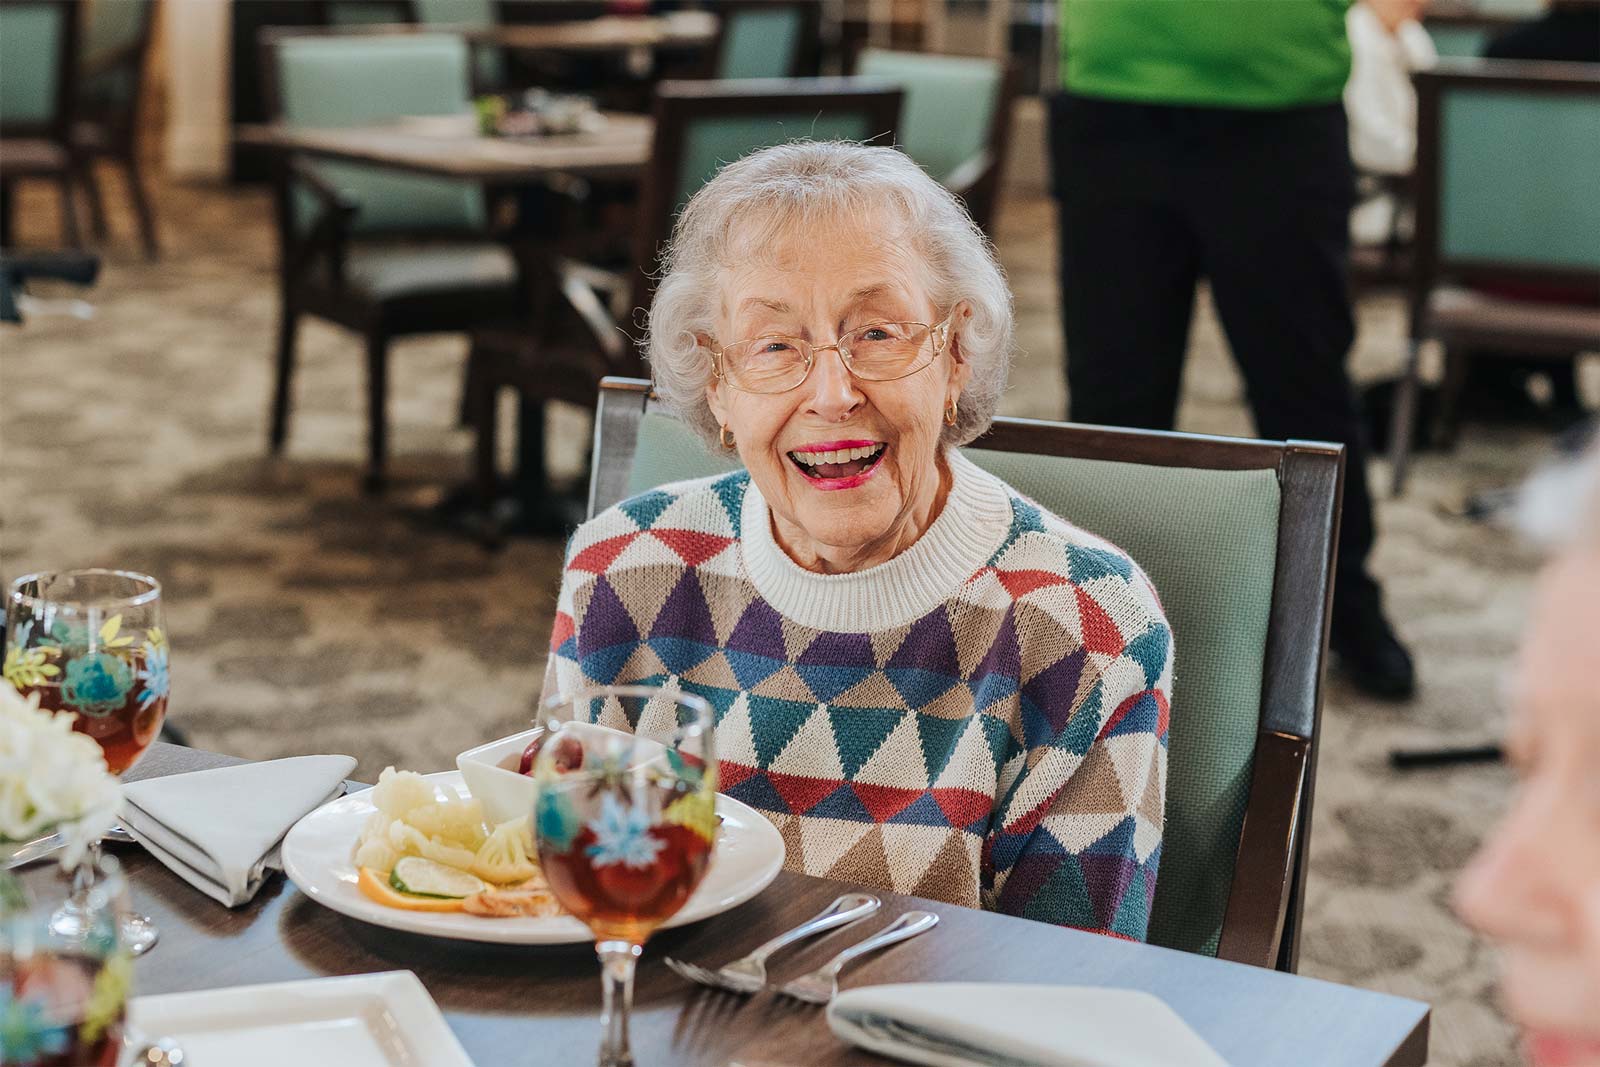 Senior Woman sitting at dining room table smiling